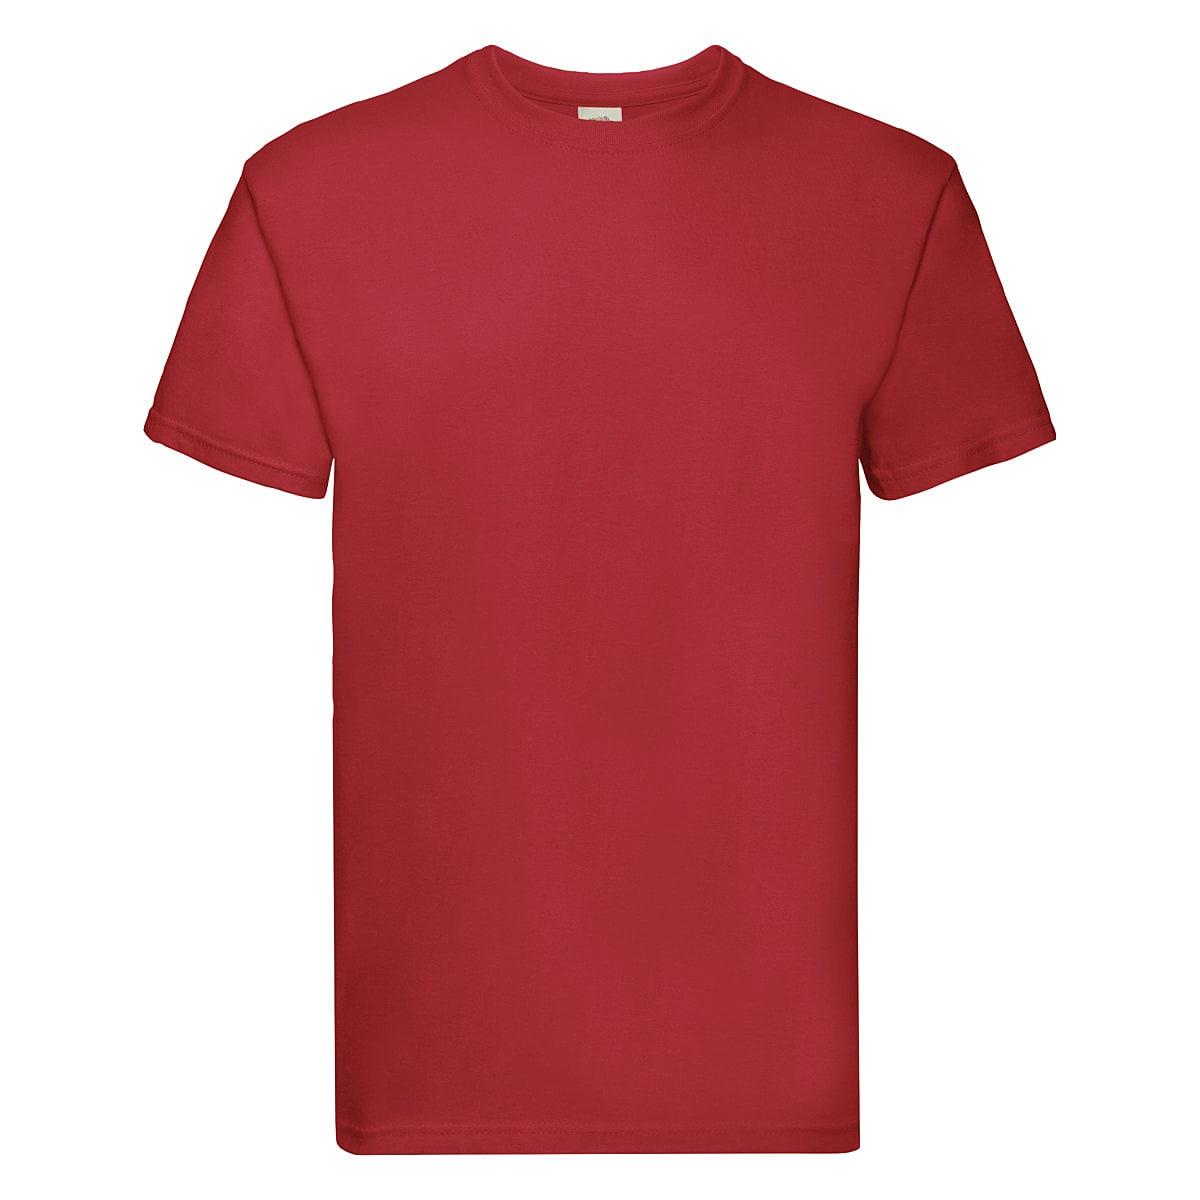 Fruit Of The Loom Super Premium T-Shirt in Red (Product Code: 61044)